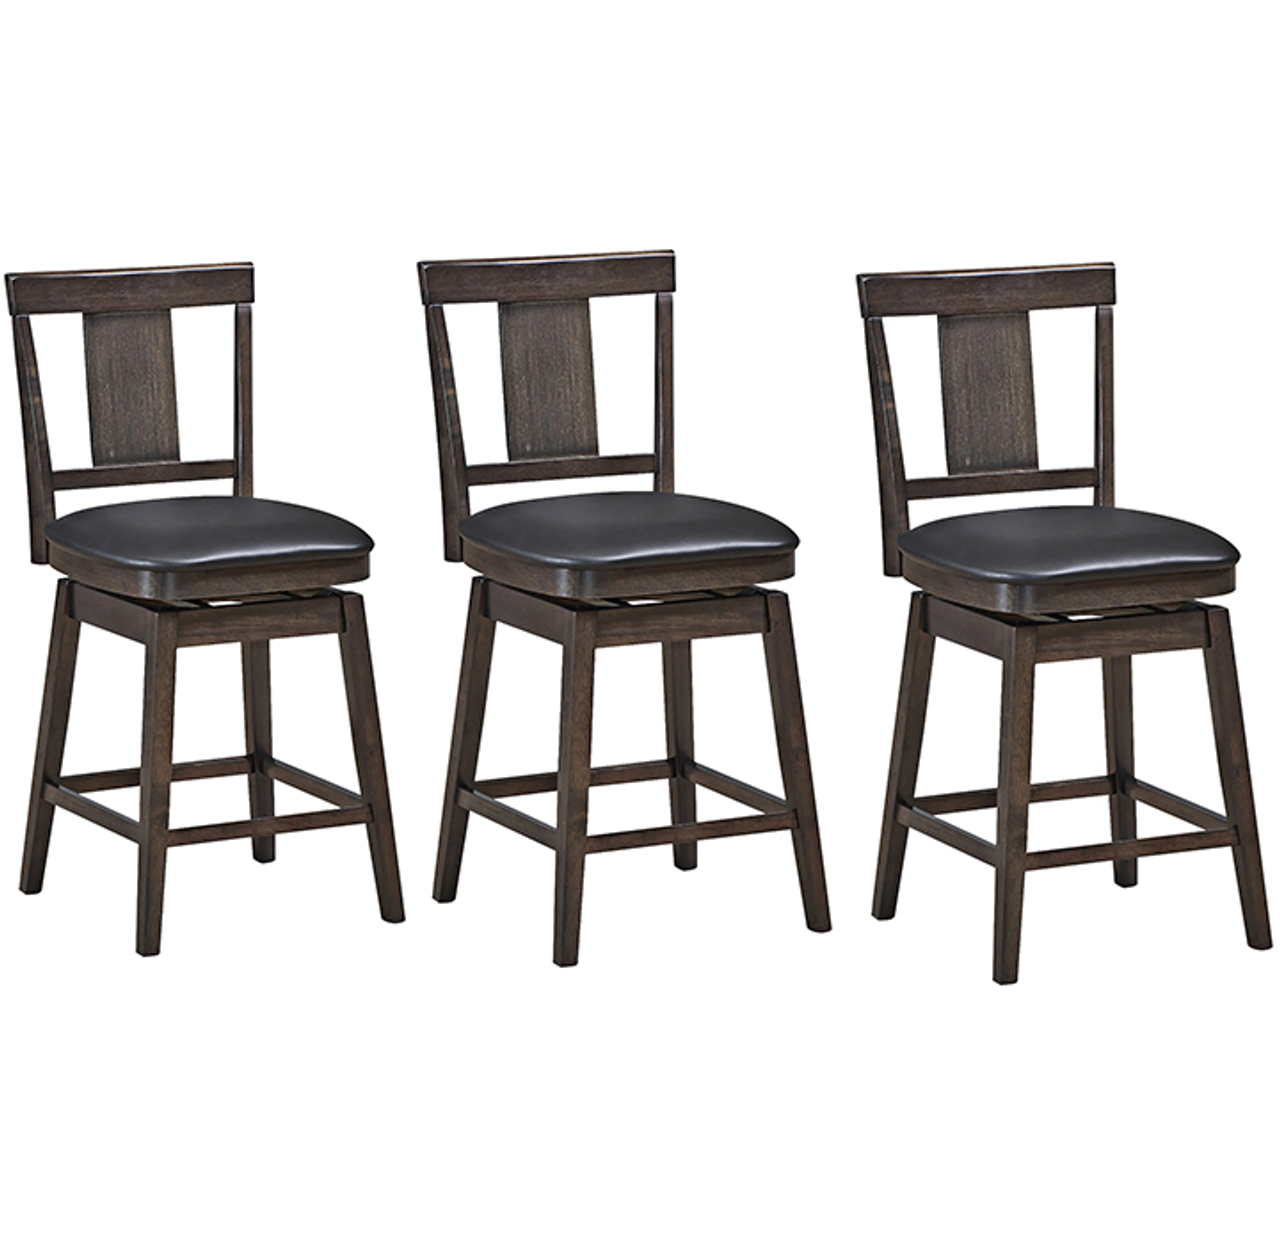 24" Counter Height Swivel Bar Stool product image